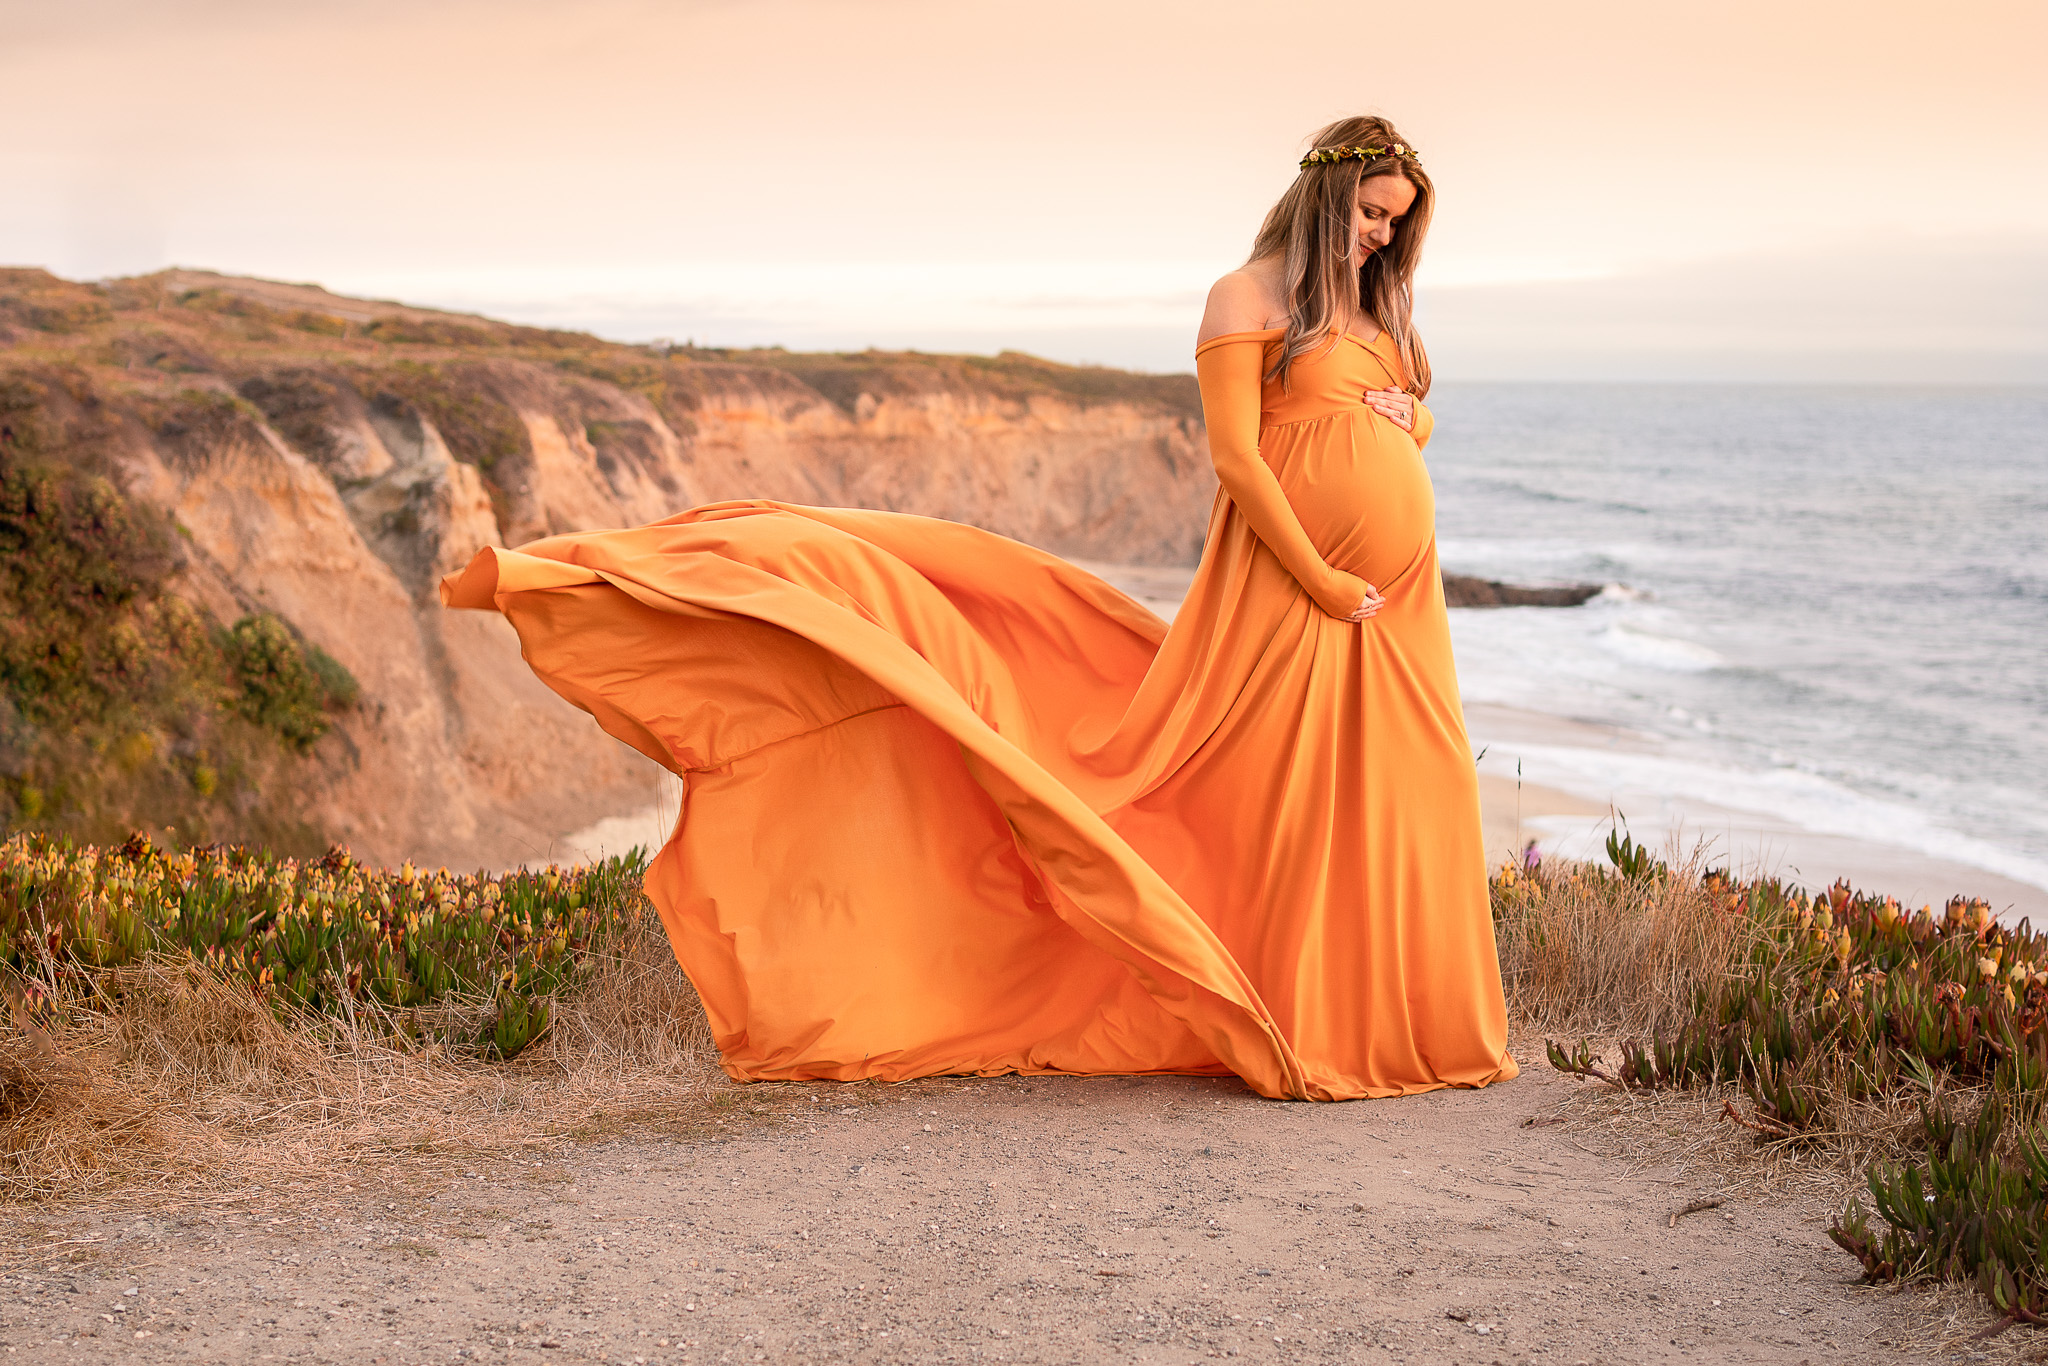 Pregnant woman in a long orange dress with backdrop of cliffs and ocean behind her in half moon bay